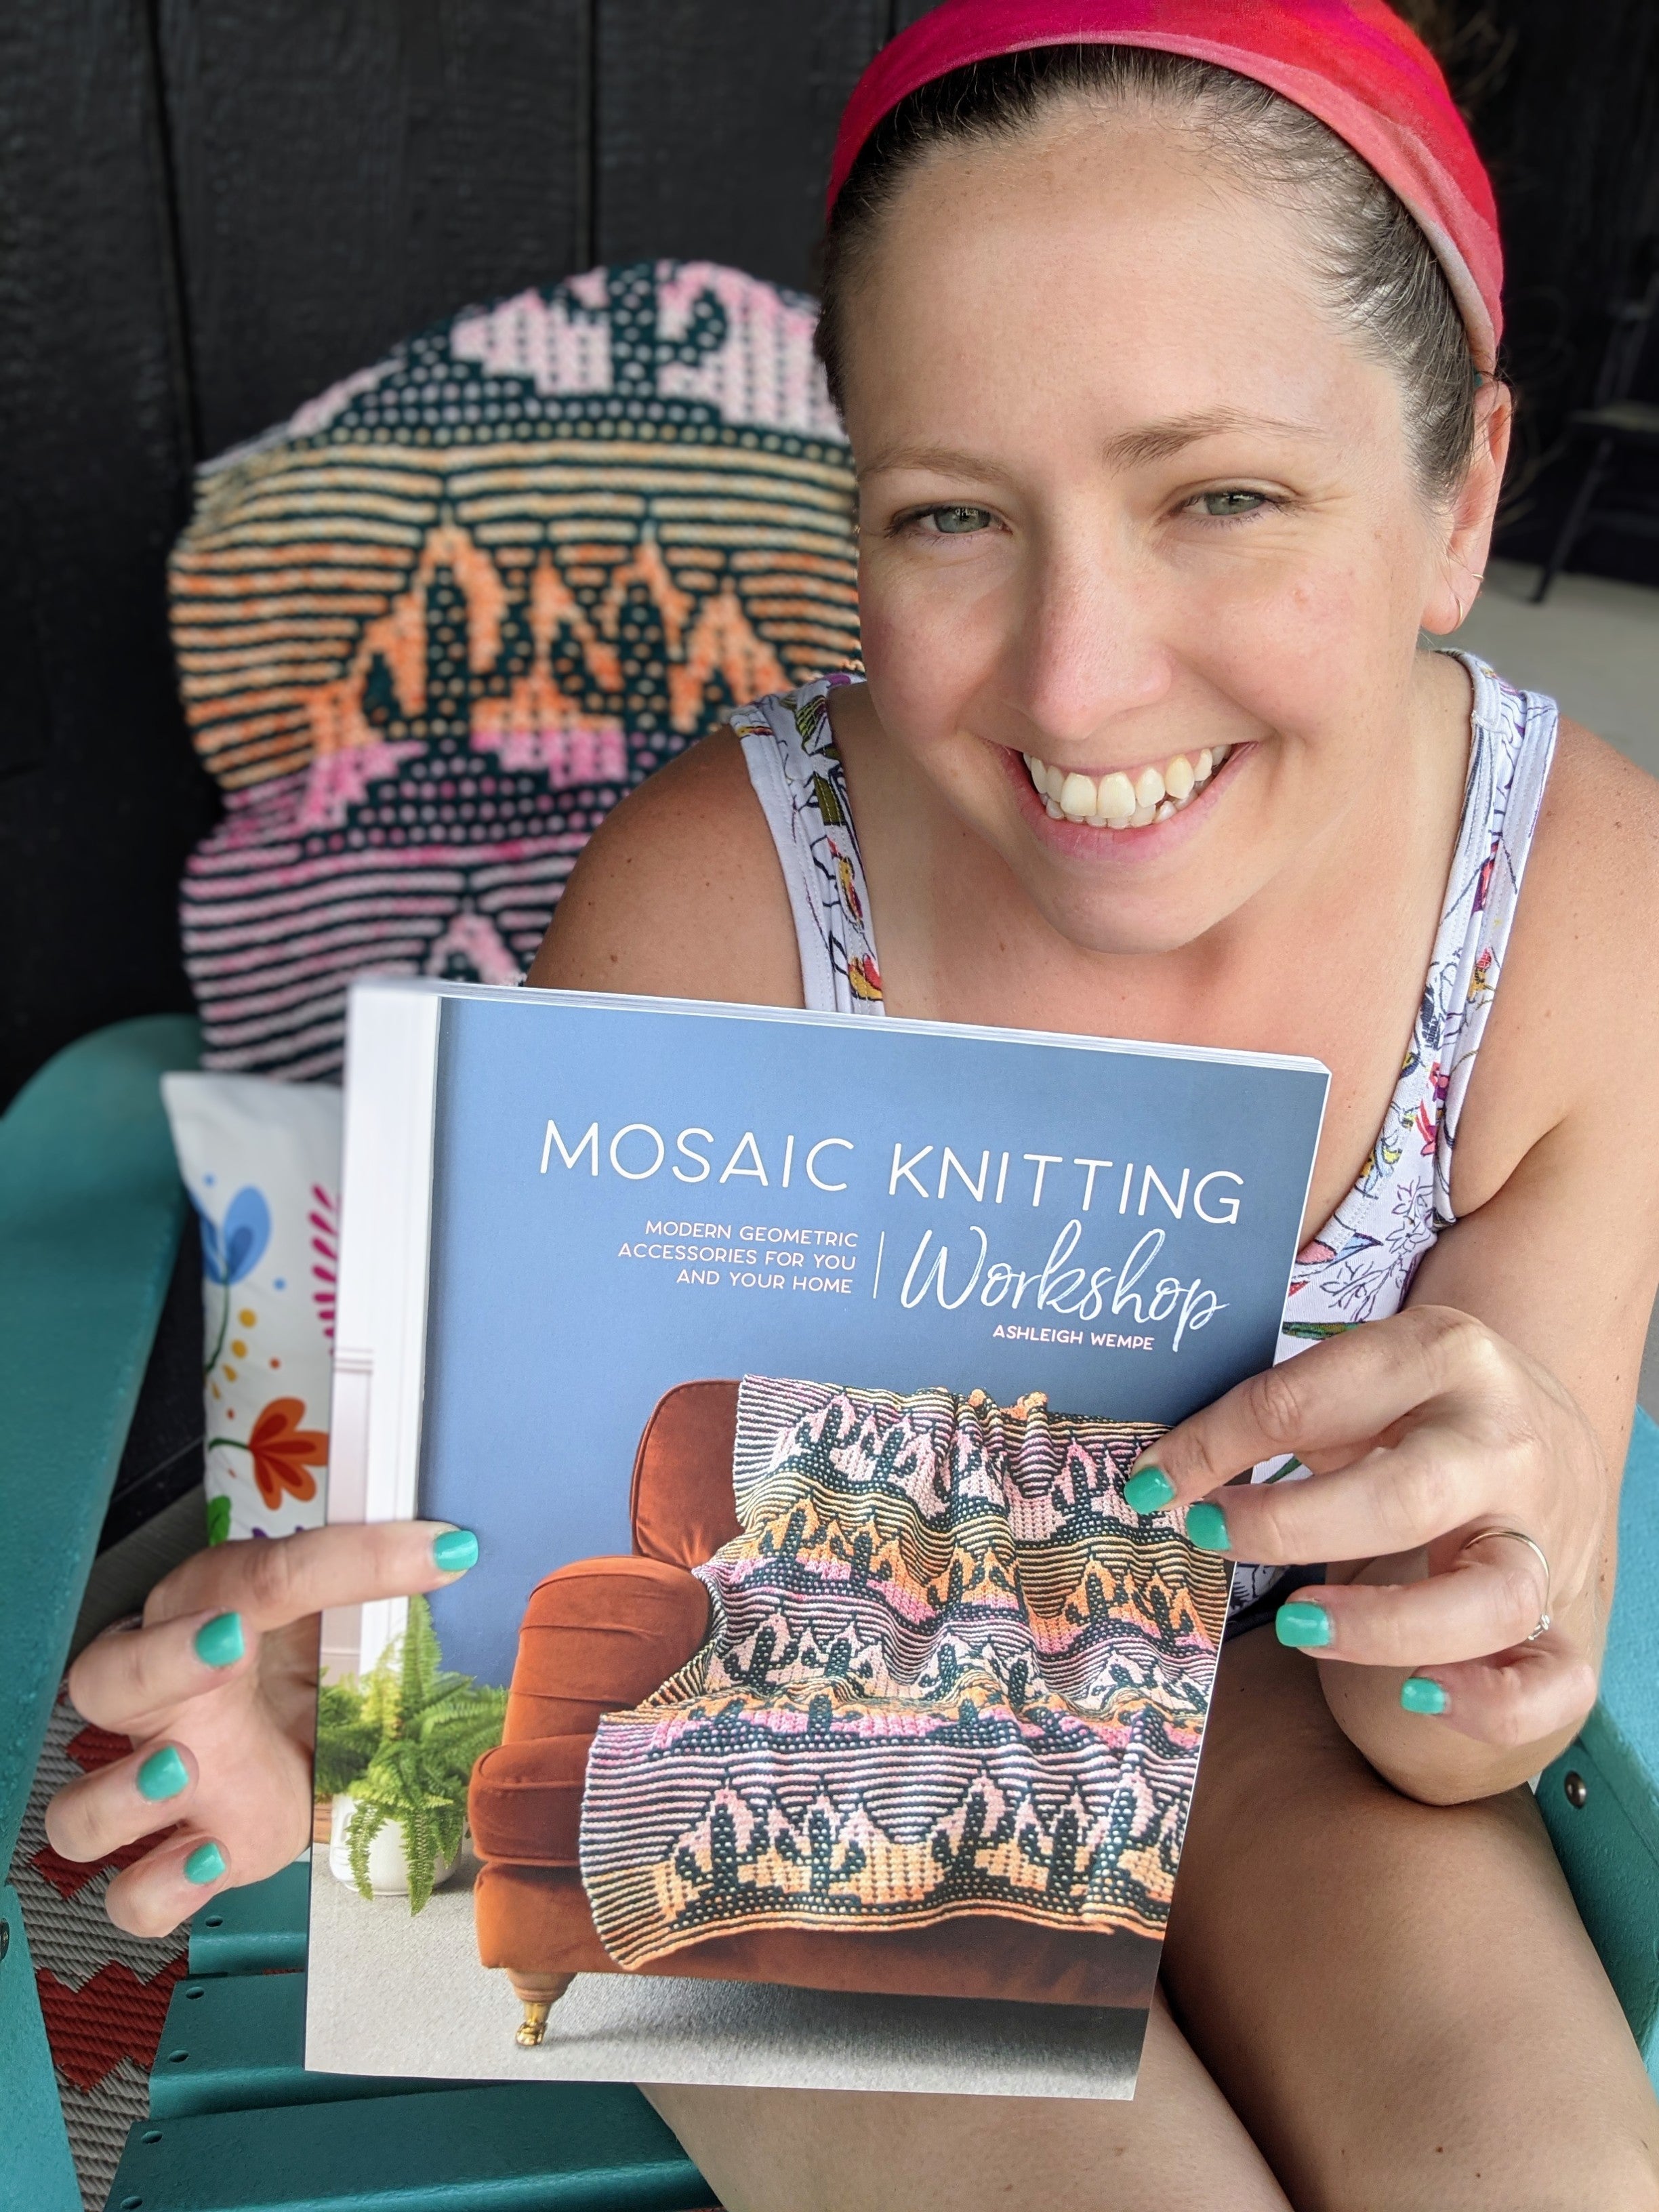 EXCLUSIVE: Author Signed Copy of "Mosaic Knitting Workshop"